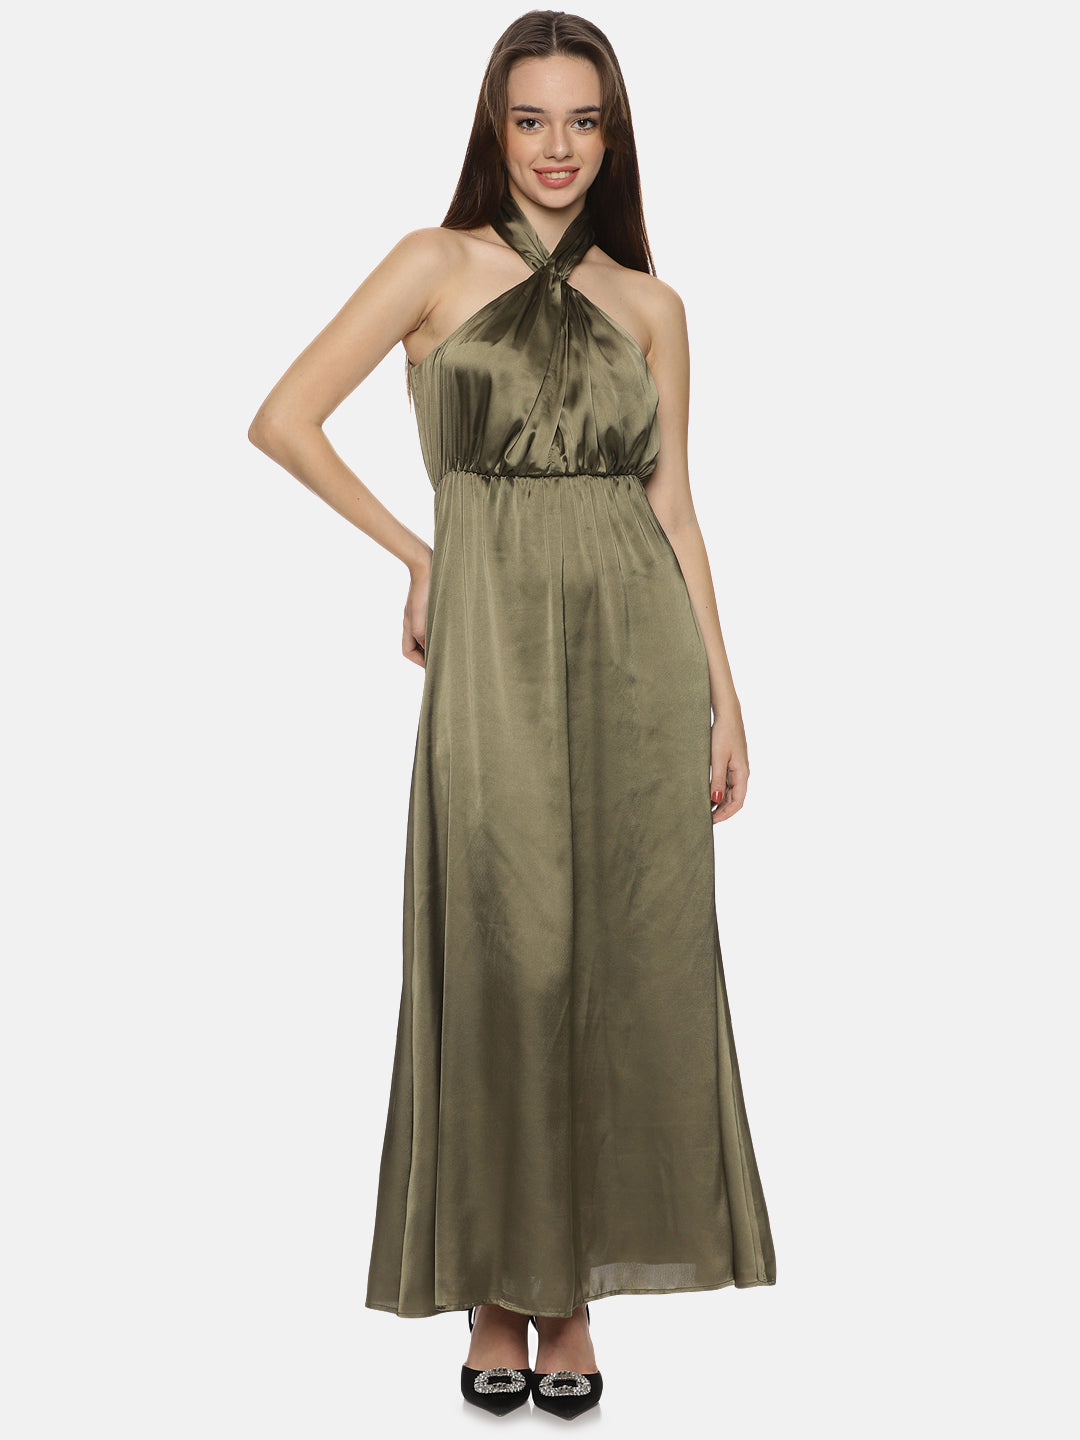 Buy Olive Printed Solid Satin Fabric | Halter Maxi Dress Online In India